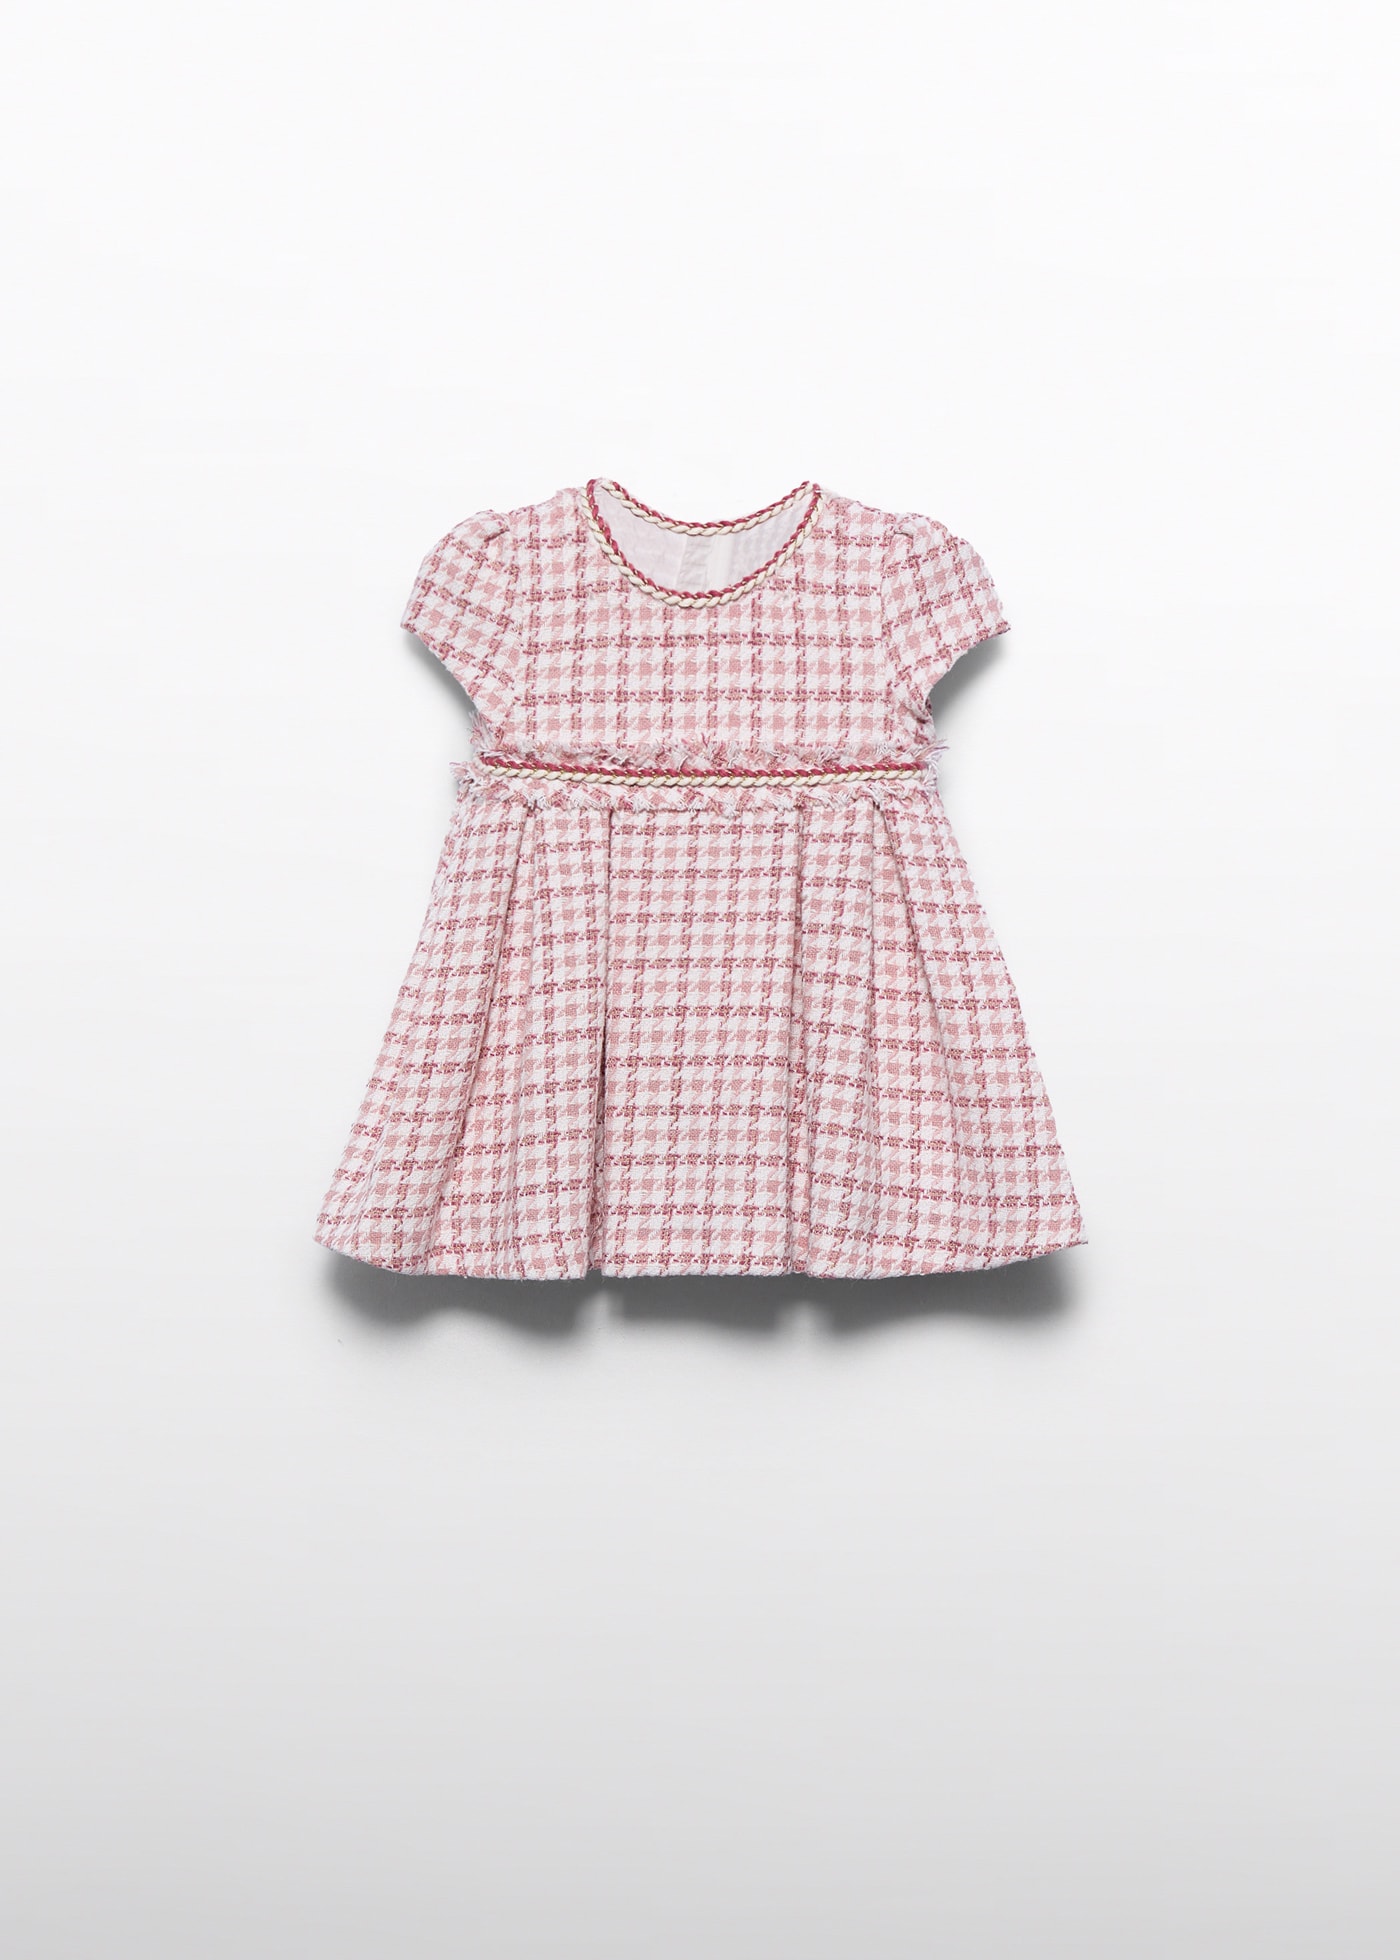 Baby Houndstooth Dress